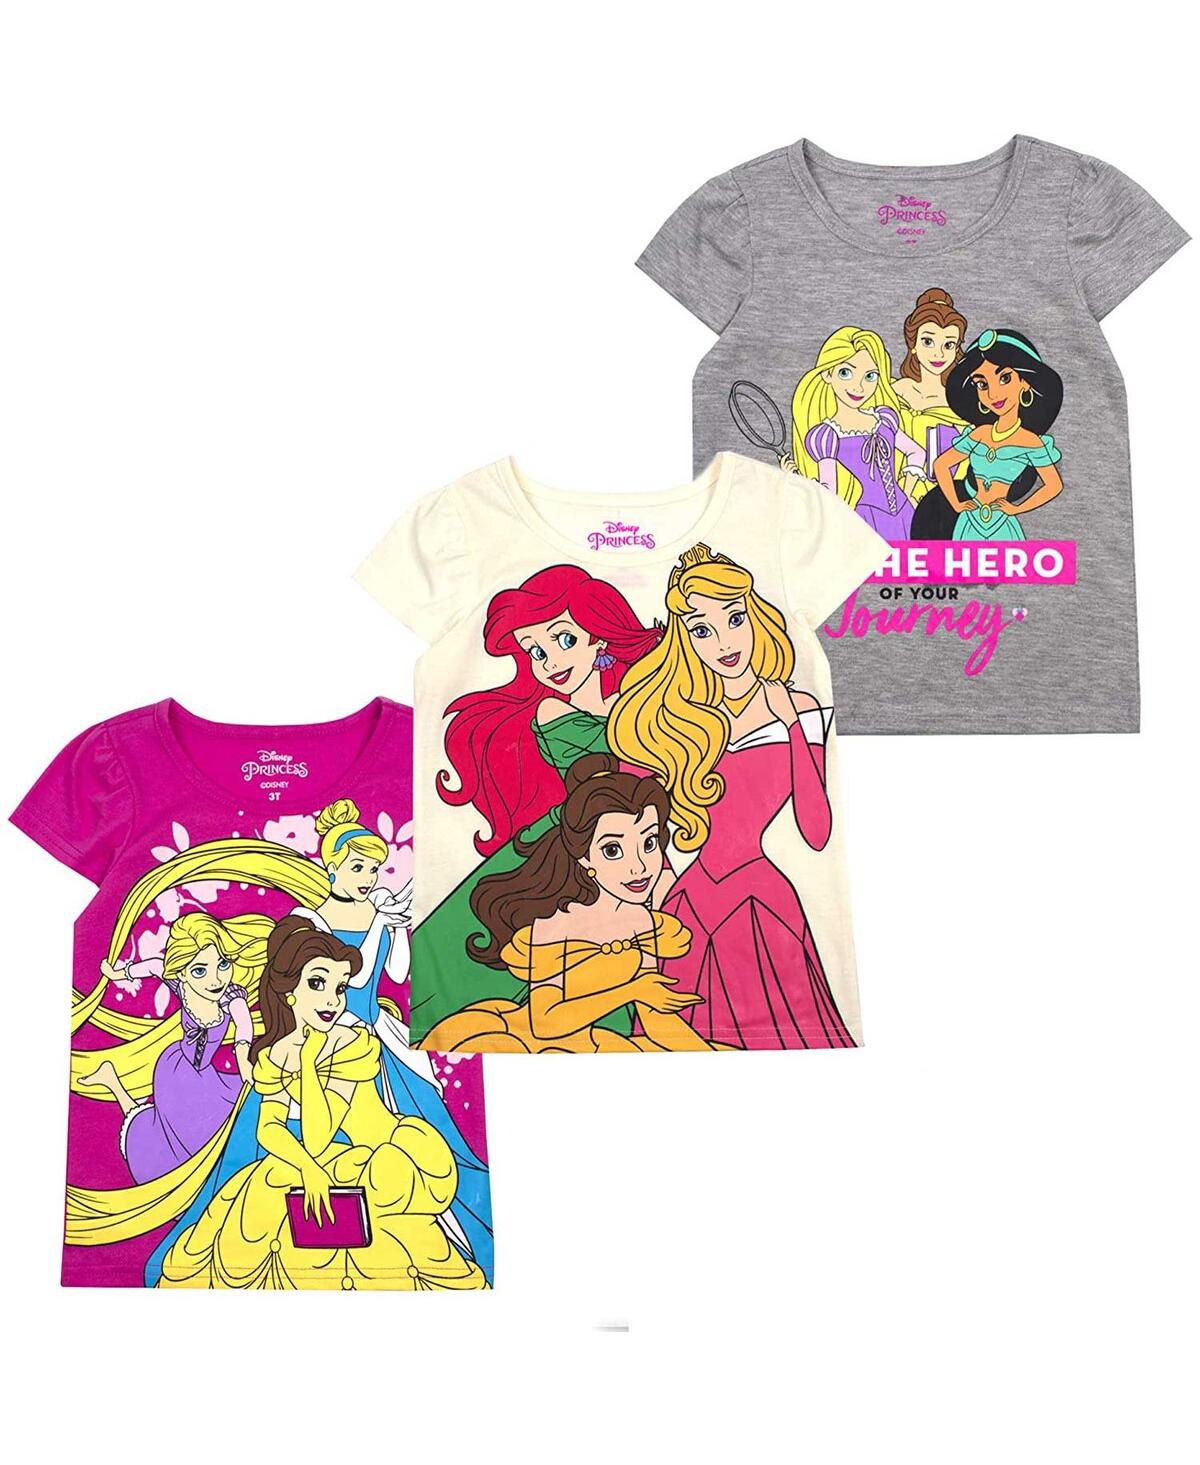 Children's Apparel Network Babies' Toddler Boys And Girls Gray, Cream, Pink Disney Princess Graphic 3-pack T-shirt Set In Gray,cream,pink